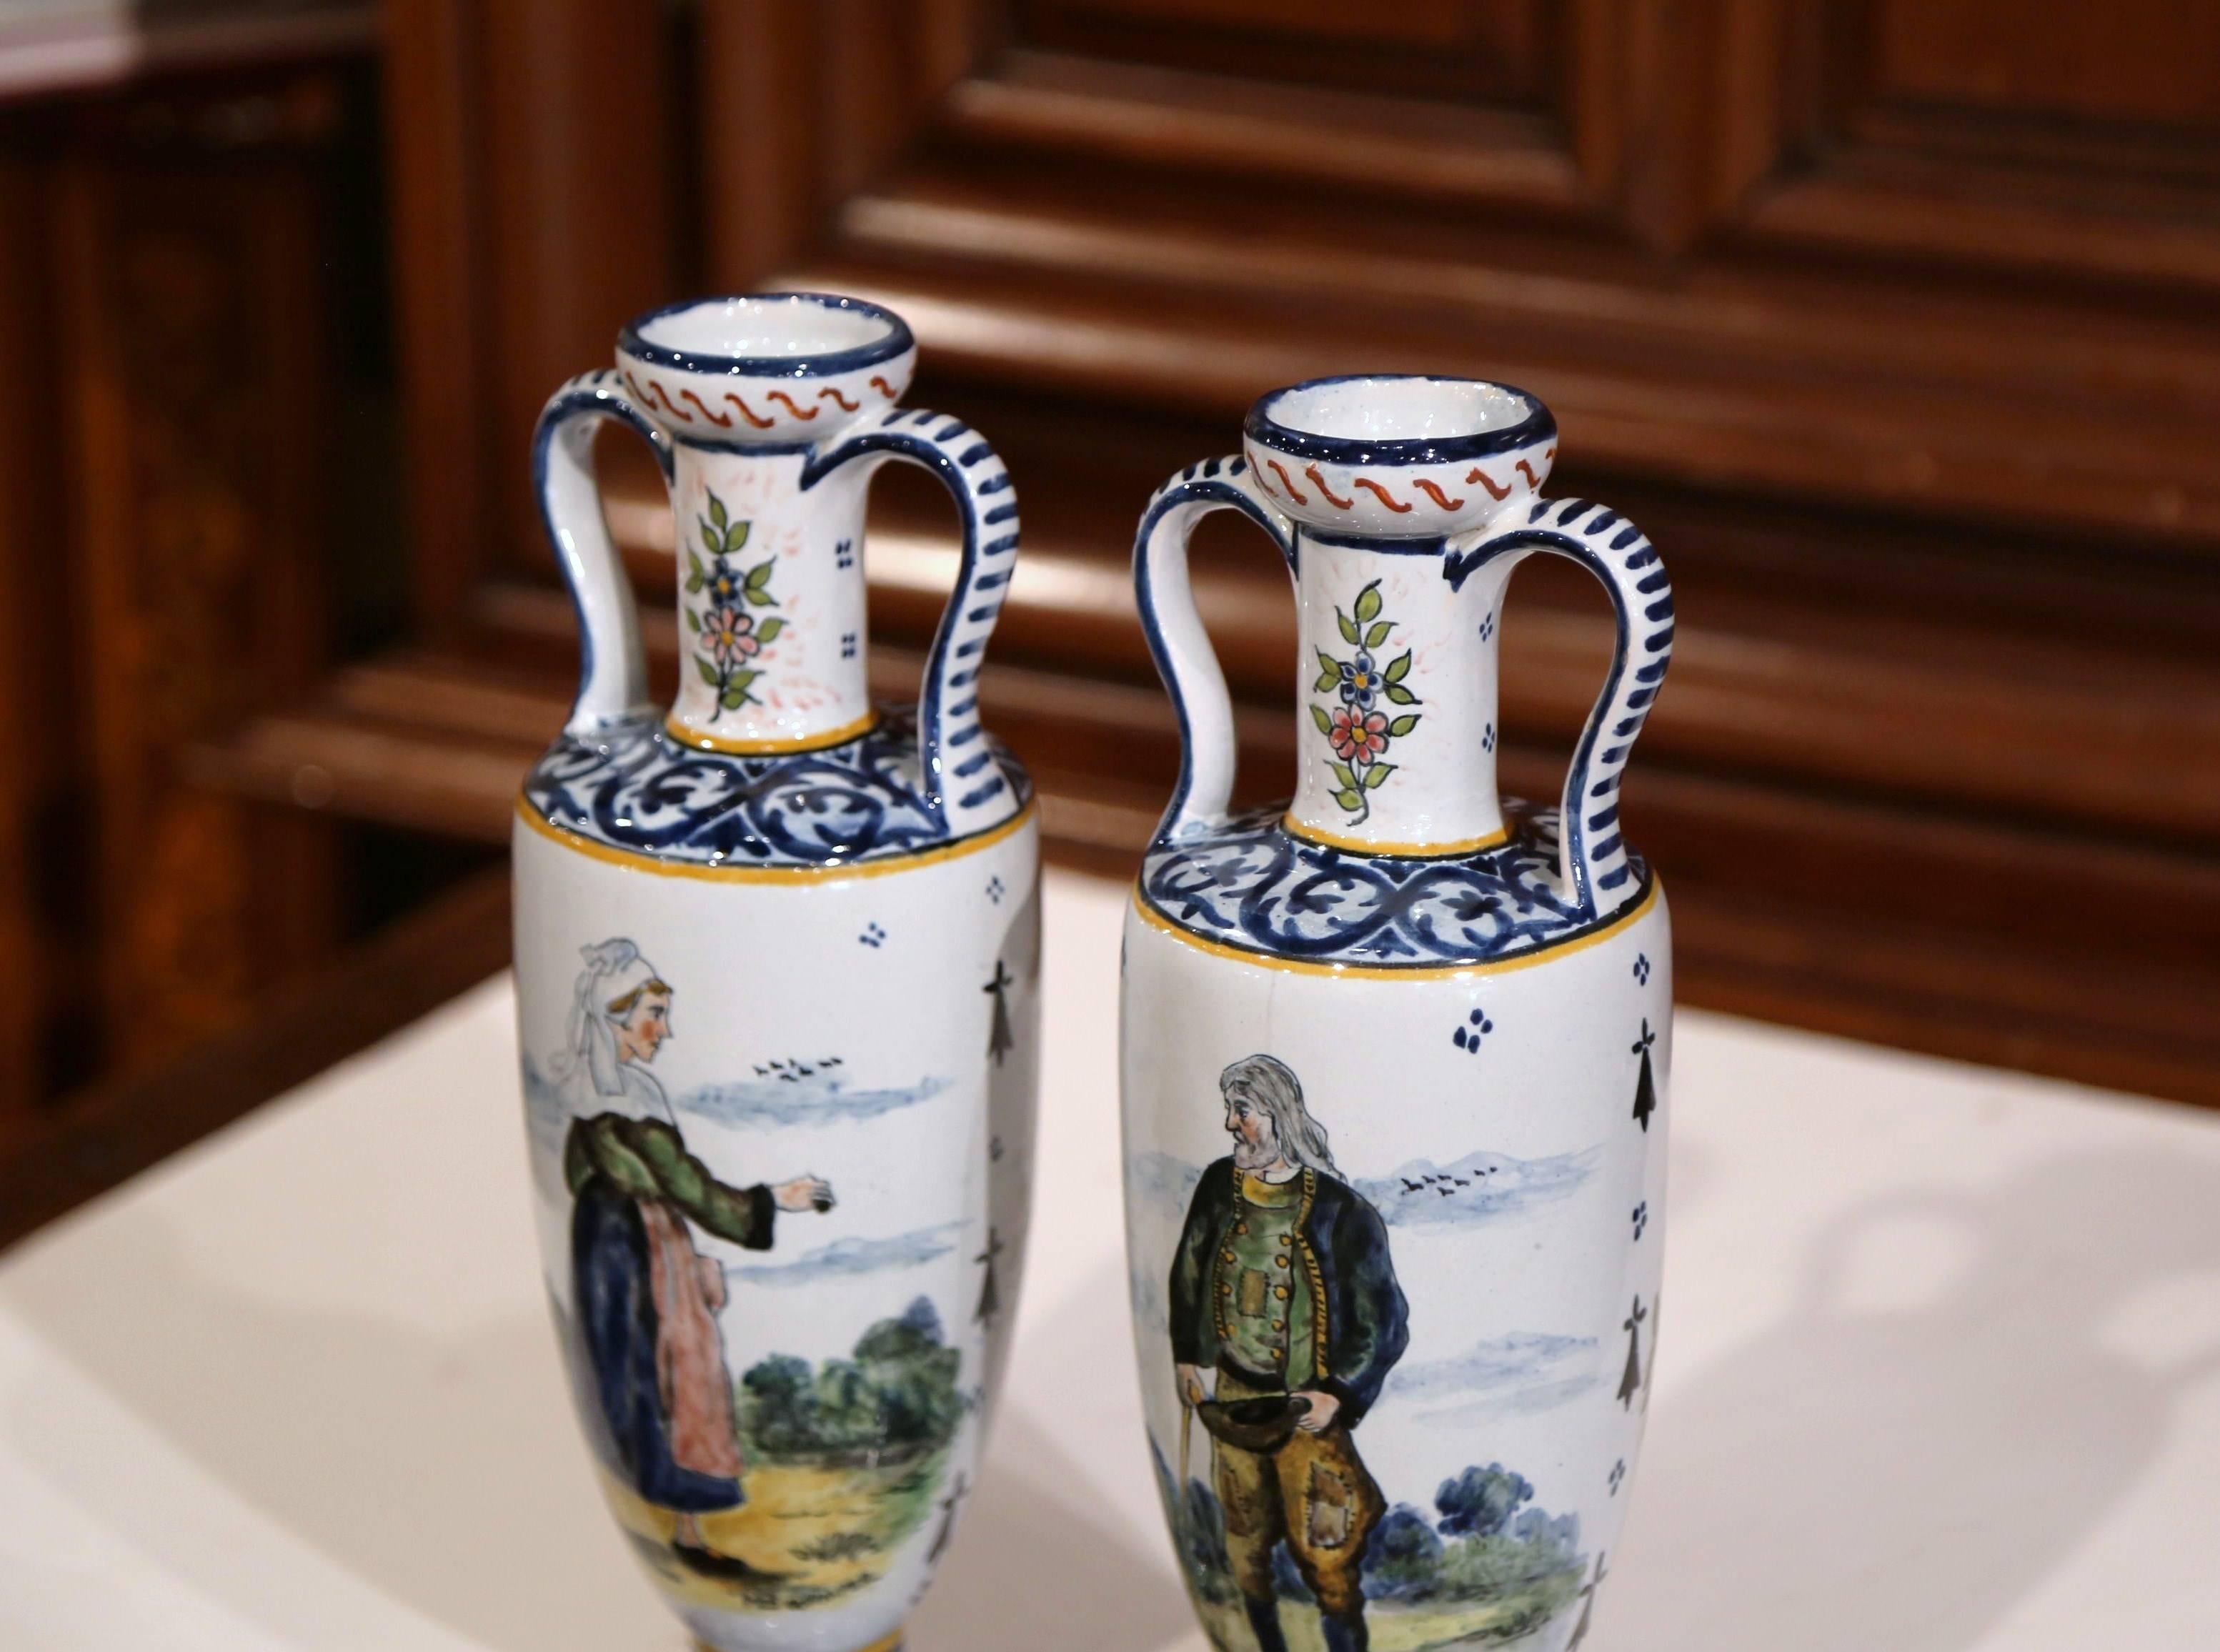  Pair of 19th Century French Hand-Painted Vases Signed HB Quimper 5